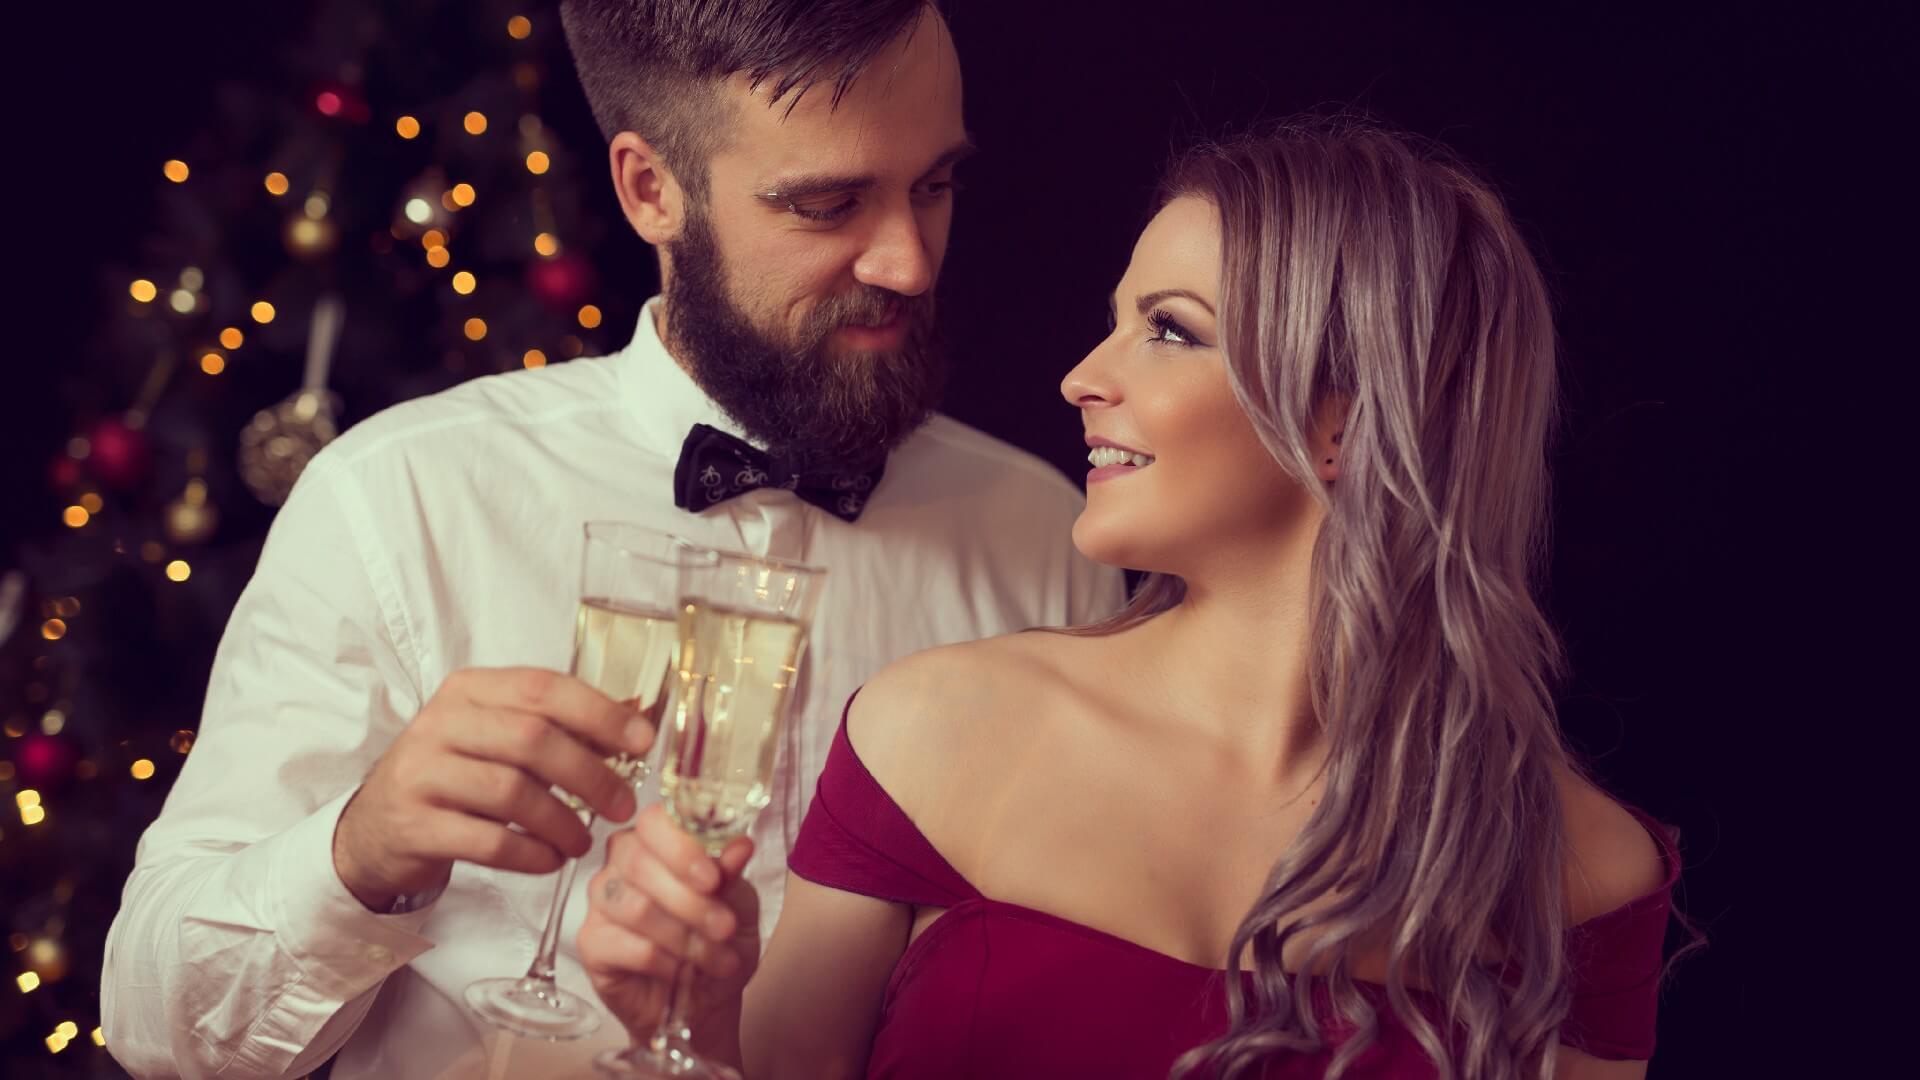 Couple is having a midnight toast with glasses of champagne during a Christmas celebration